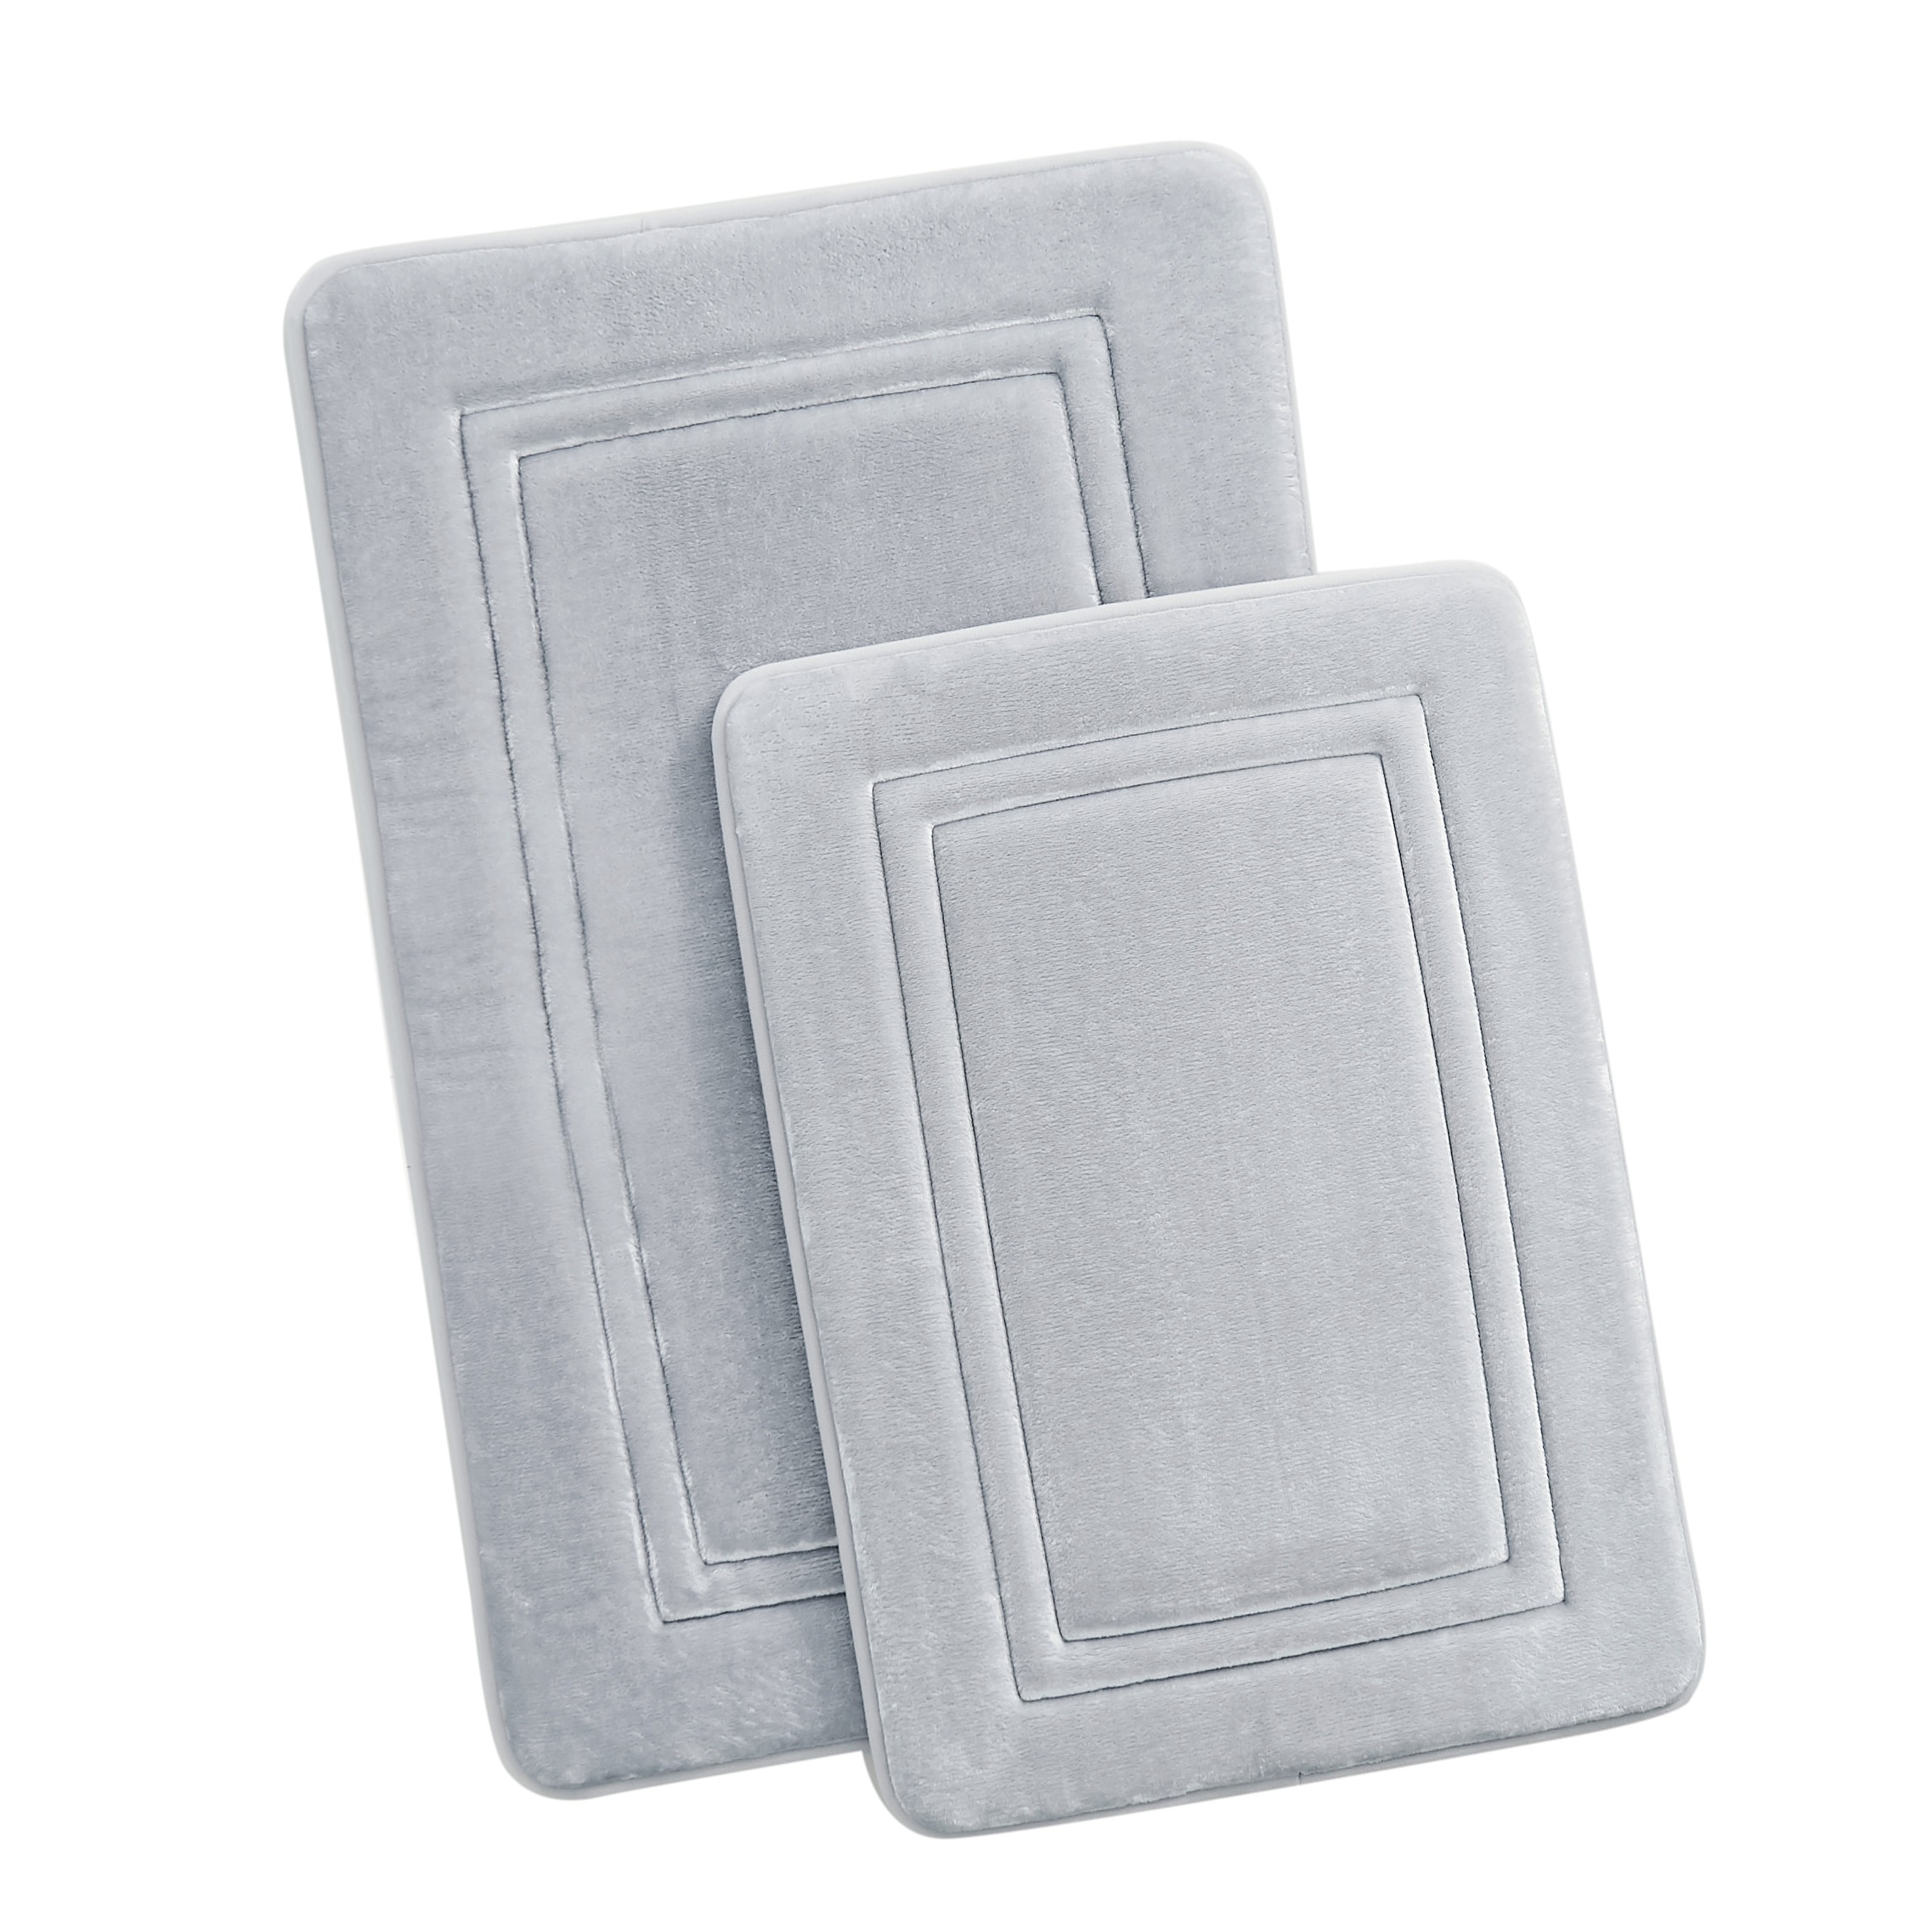 https://ak1.ostkcdn.com/images/products/is/images/direct/92d11eff23121a2ca5352cf09ac266acc87c9f0e/Truly-Calm-Antimicrobial-2-Pack-Memory-Foam-Bath-Rug.jpg